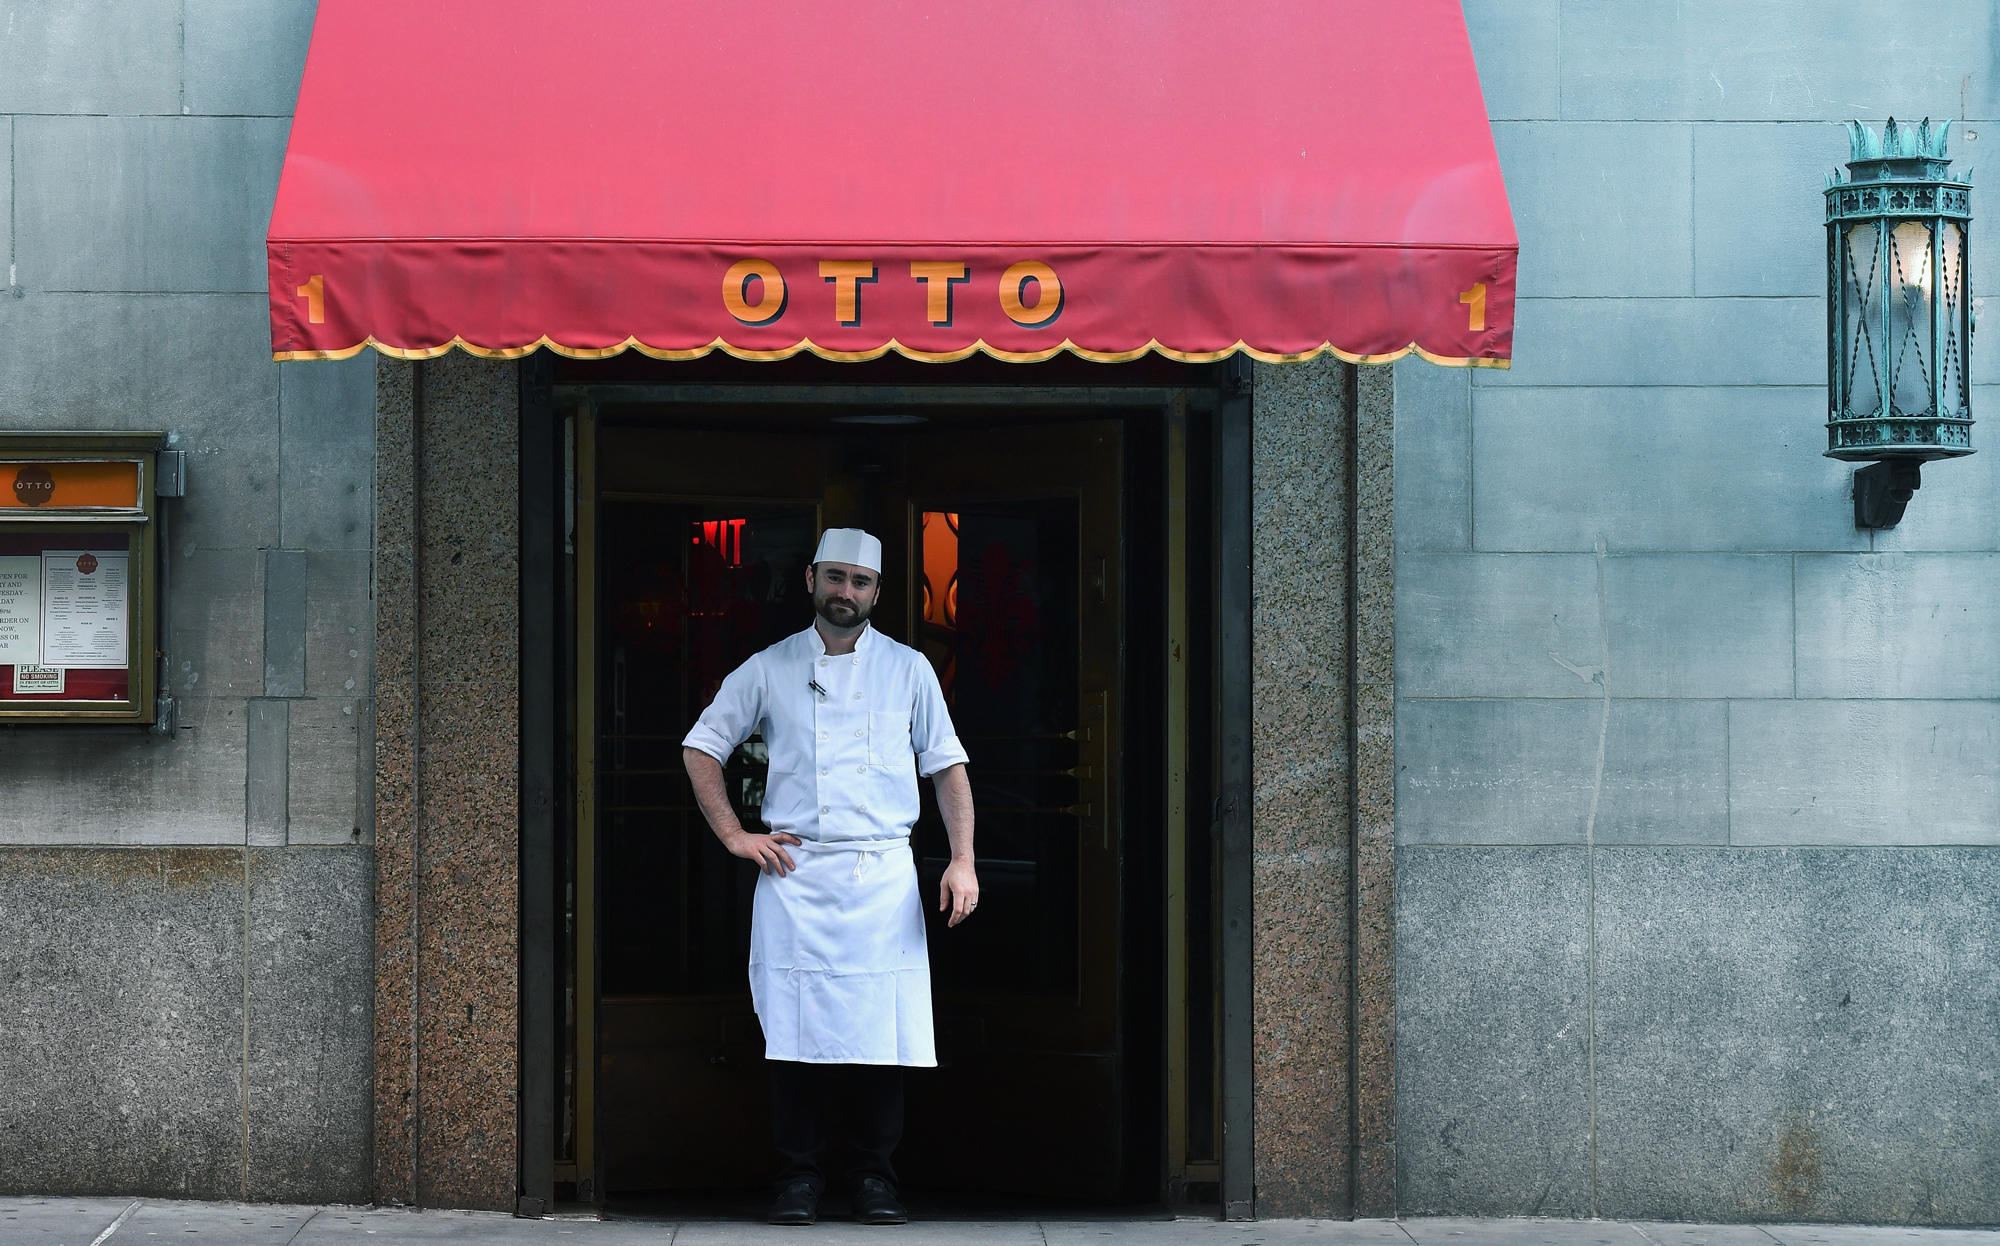 The executive chef of Otto Enoteca stands in front of the closed restaurant caused by the coronavirus pandemic. (Photo by ANGELA WEISS/AFP via Getty Images)